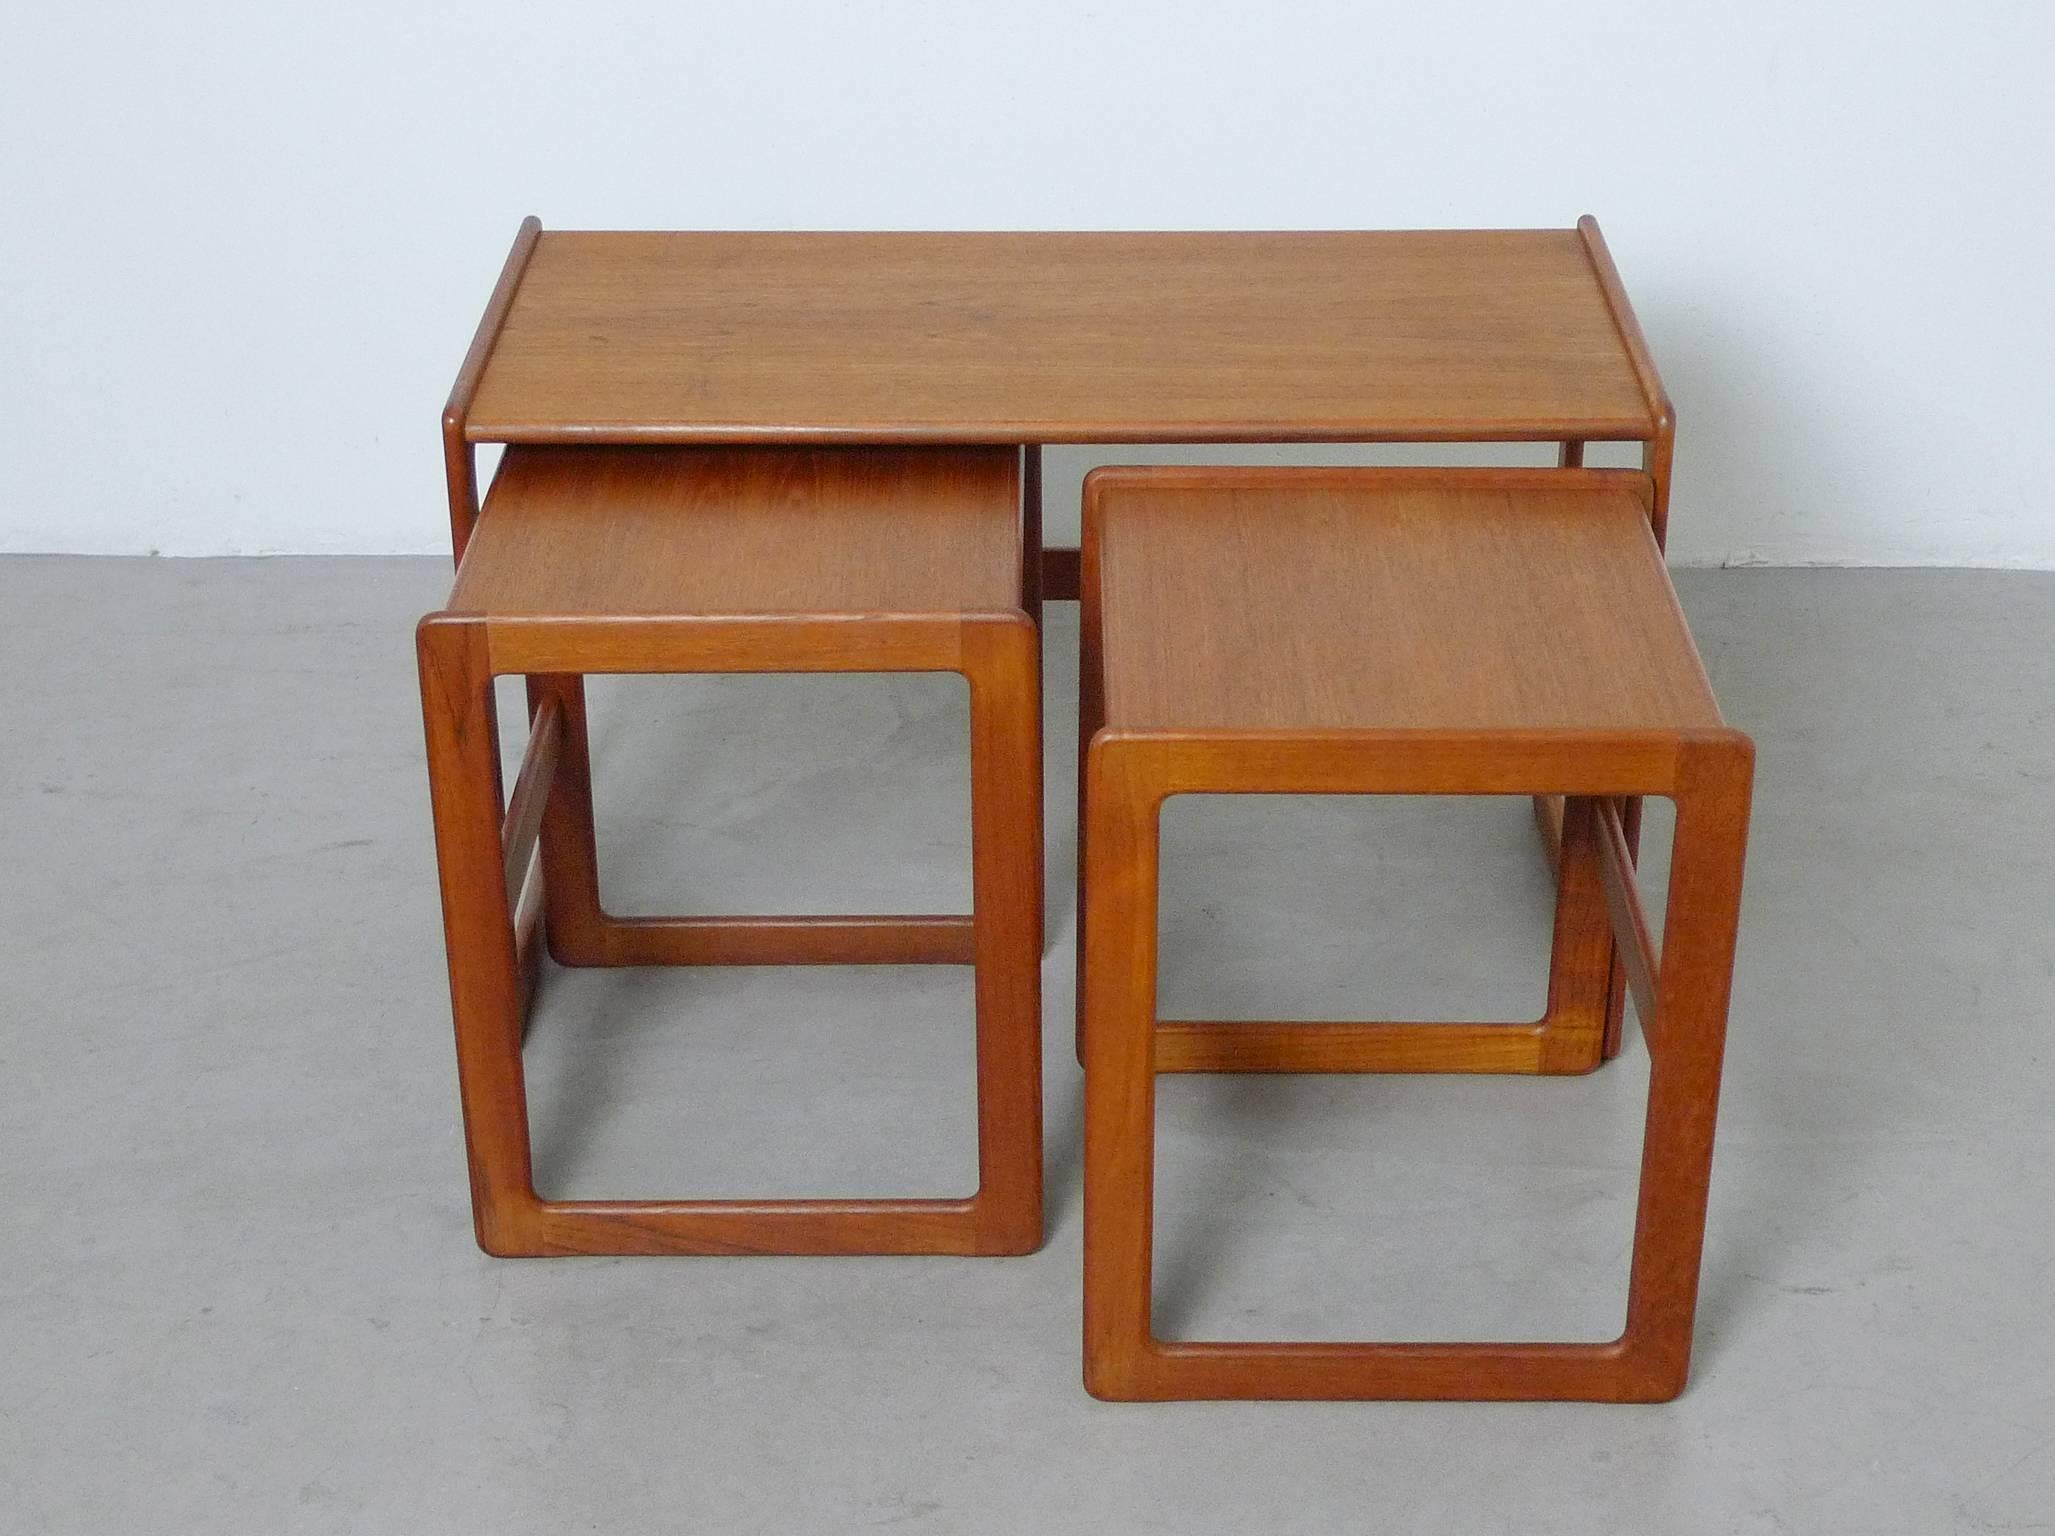 This nesting table set was designed by Arne Hovmand-Olsen for the Danish manufacturer Mogens Kold in 1962. The teakwood tables are in a very good condition.